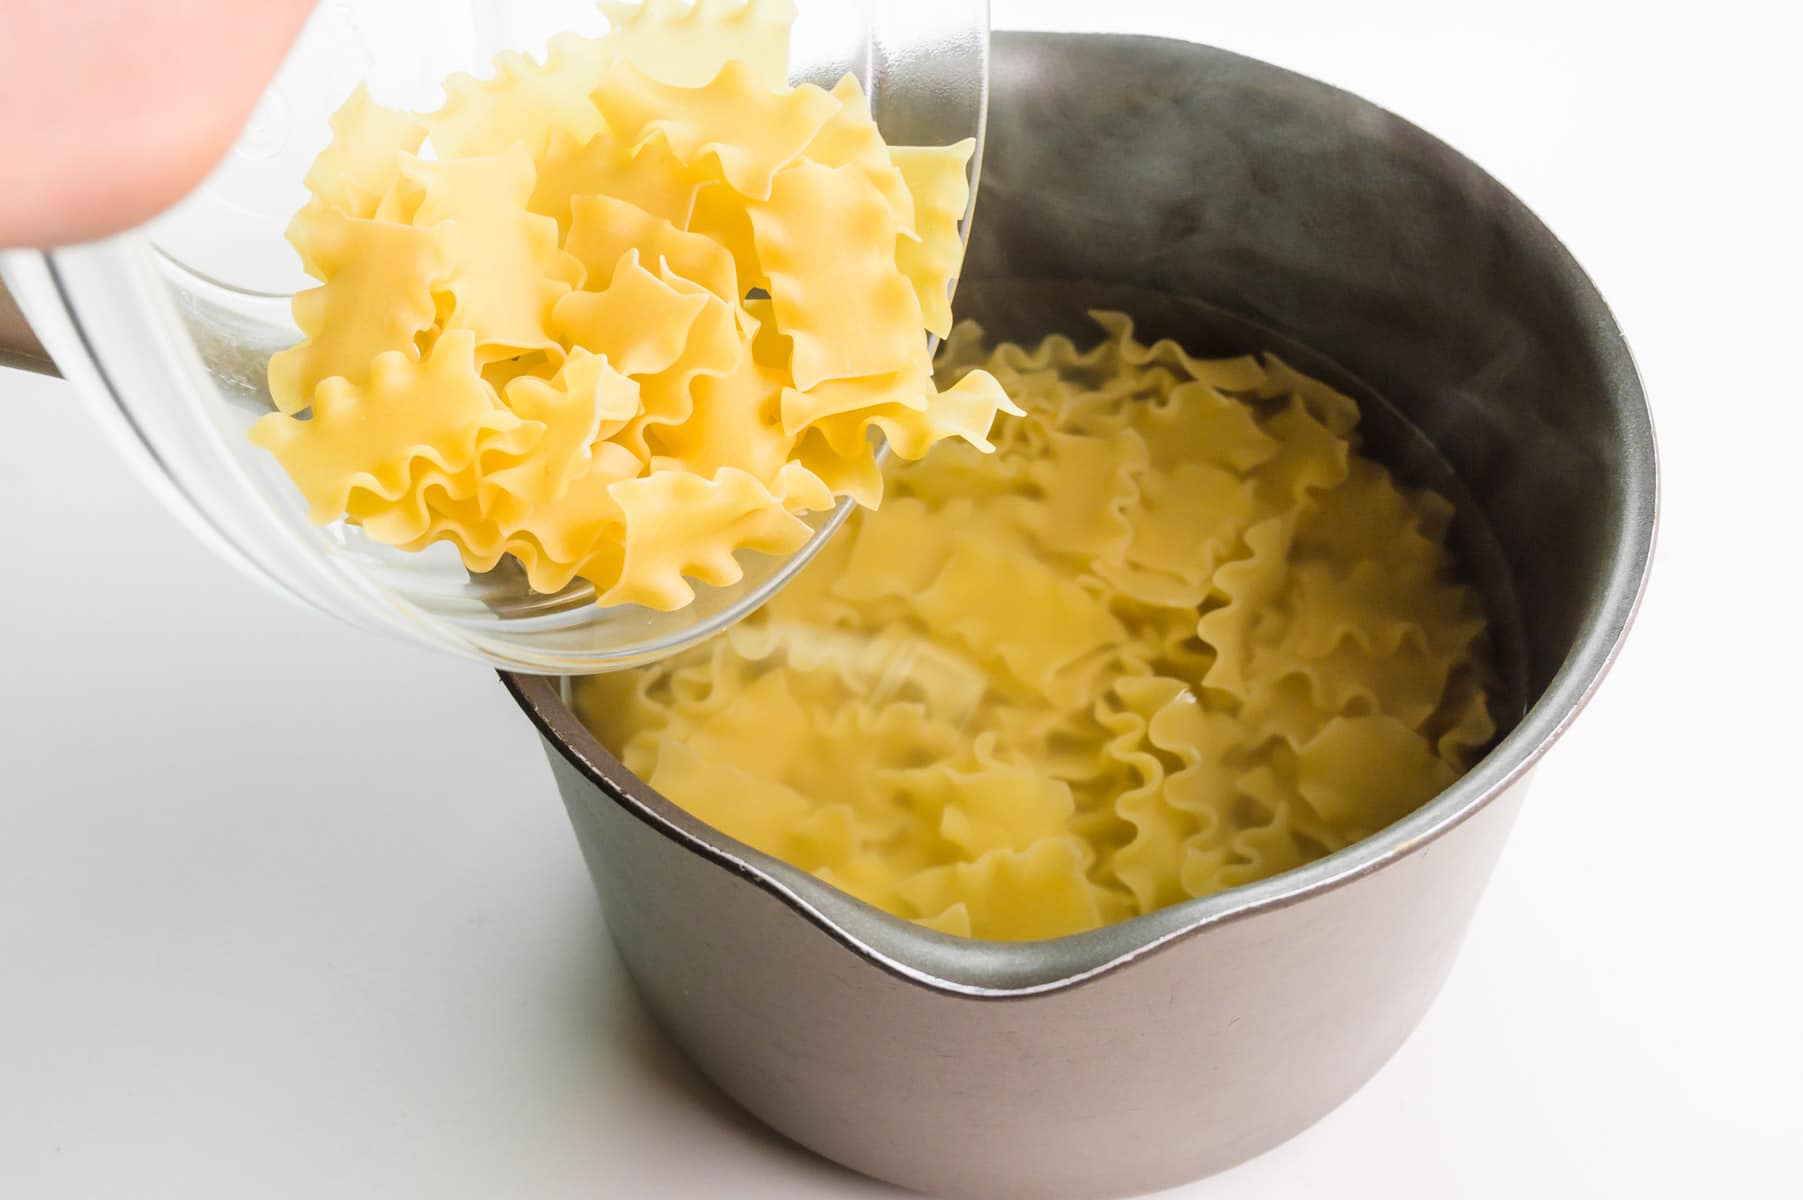 Noodles are being added to boiling water in a saucepan.